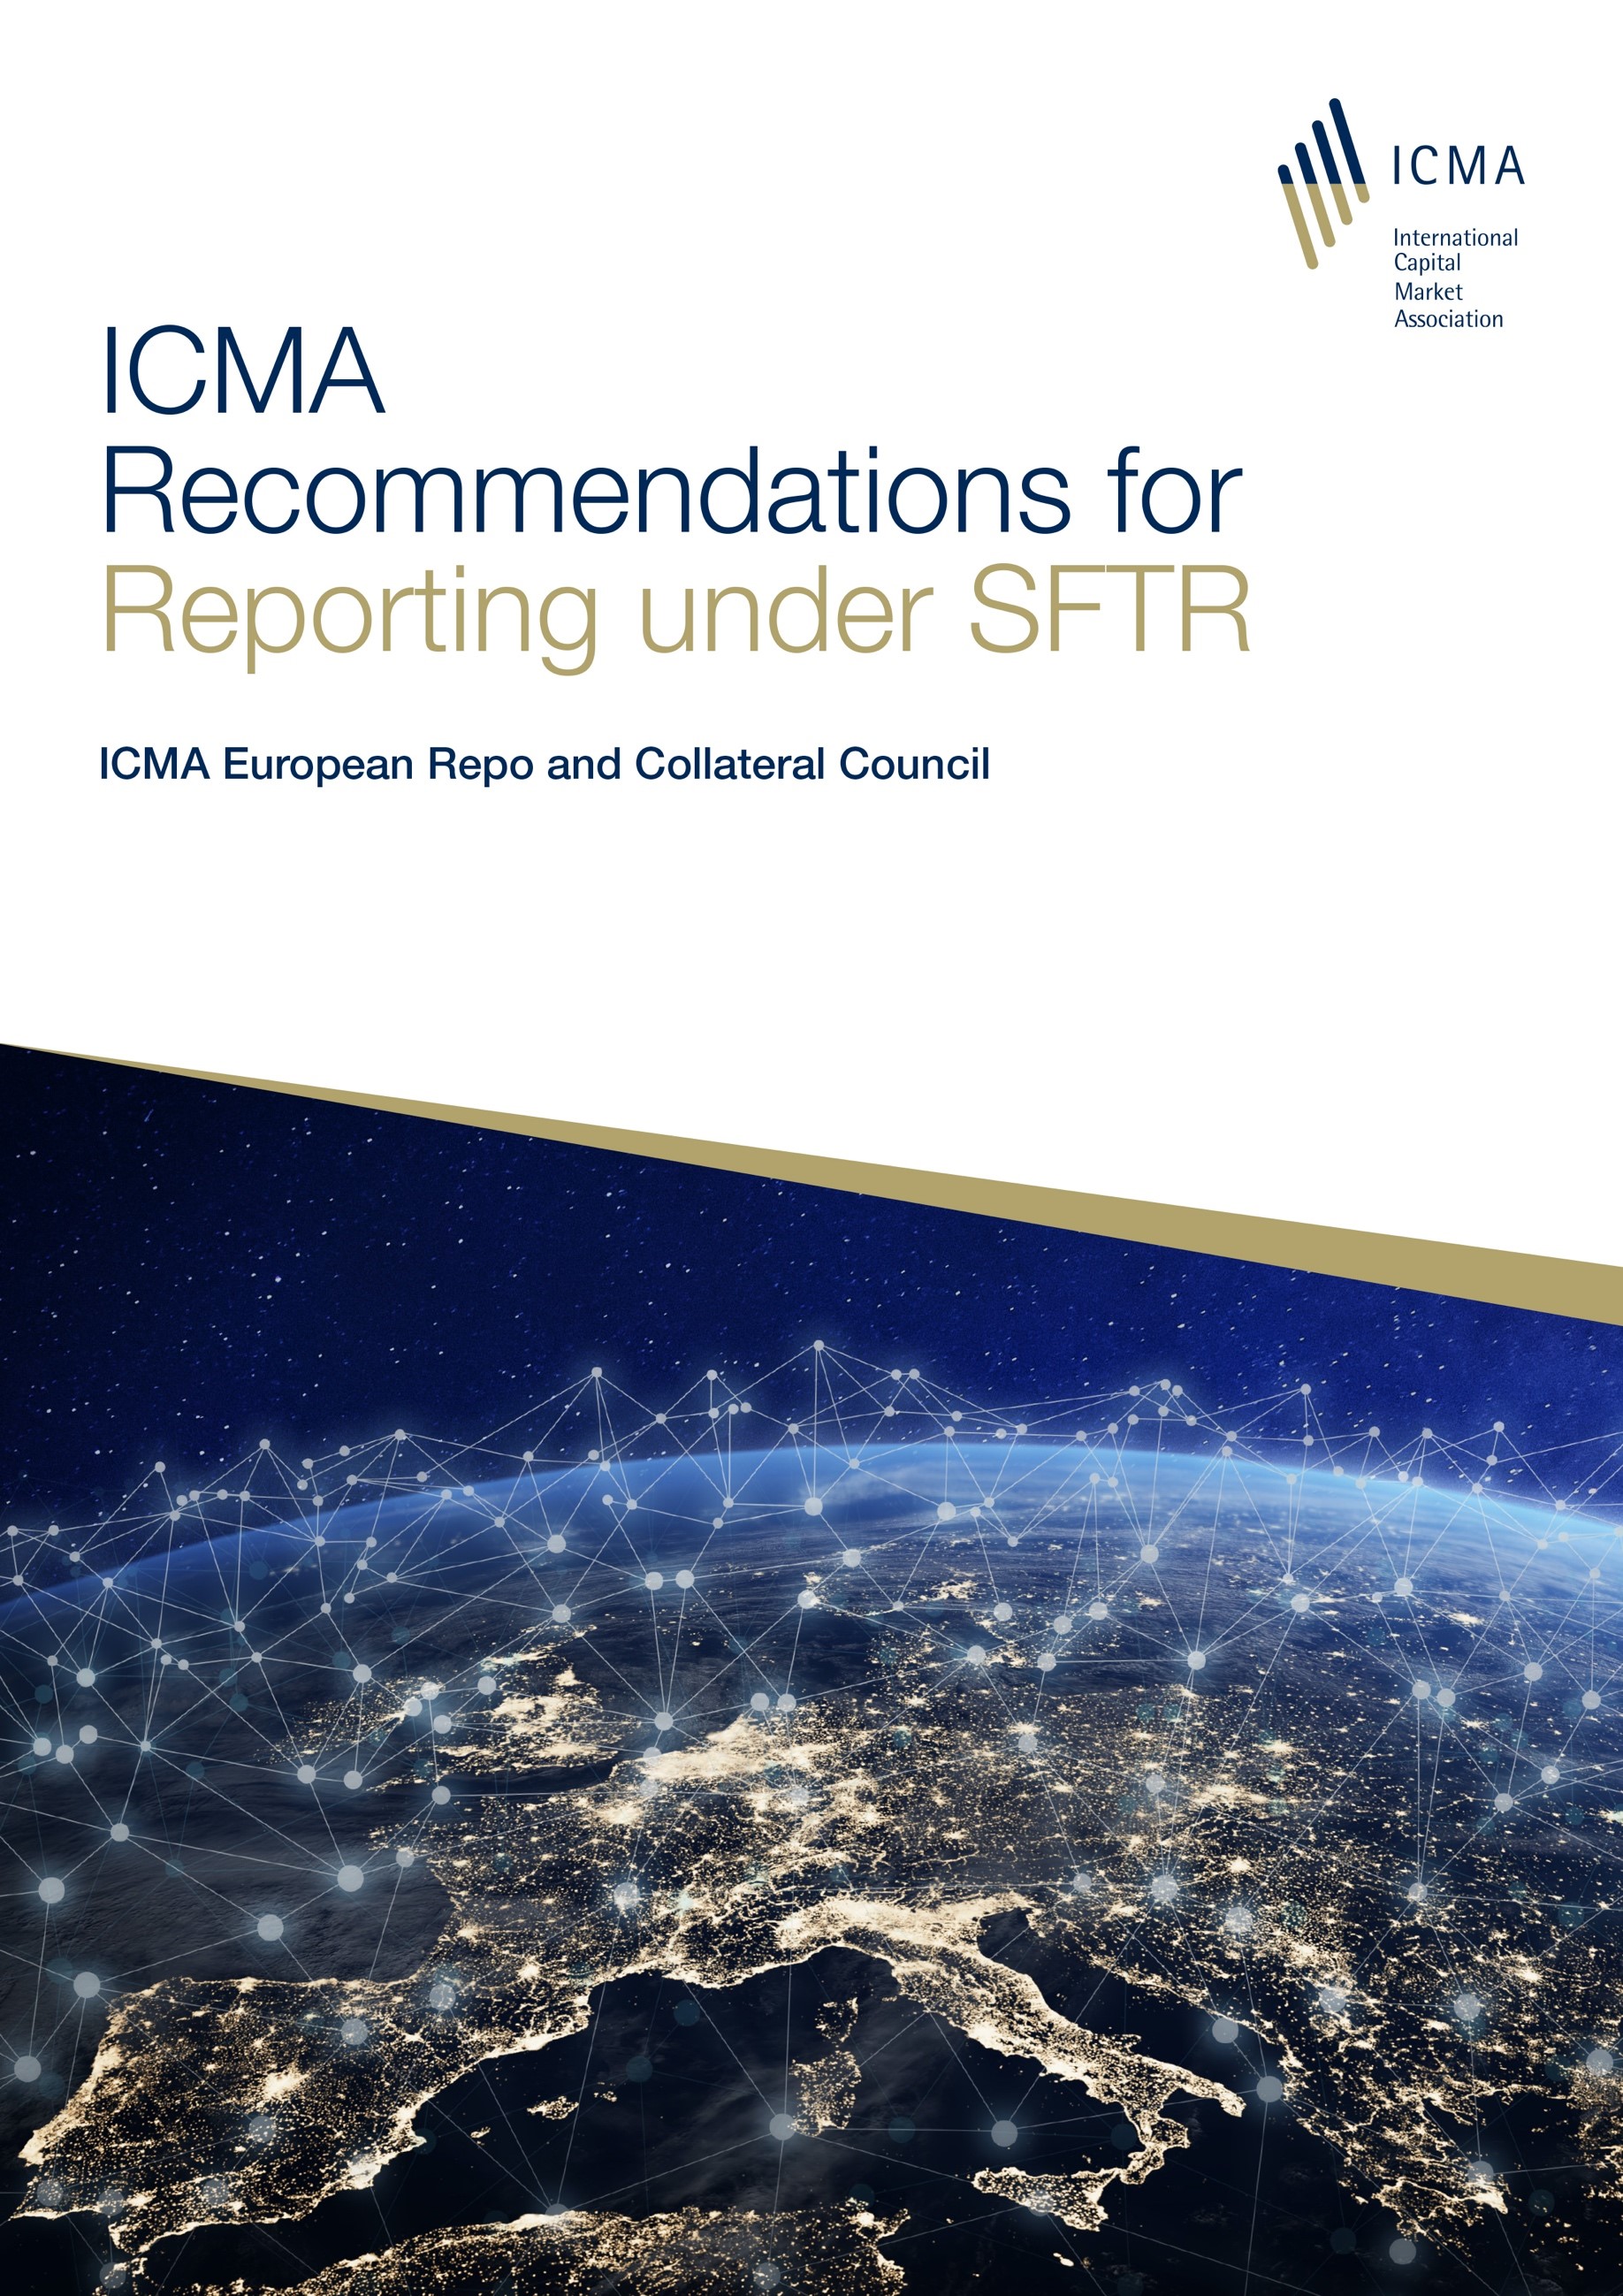 ICMA ERCC Recommendations for Reporting under SFTR